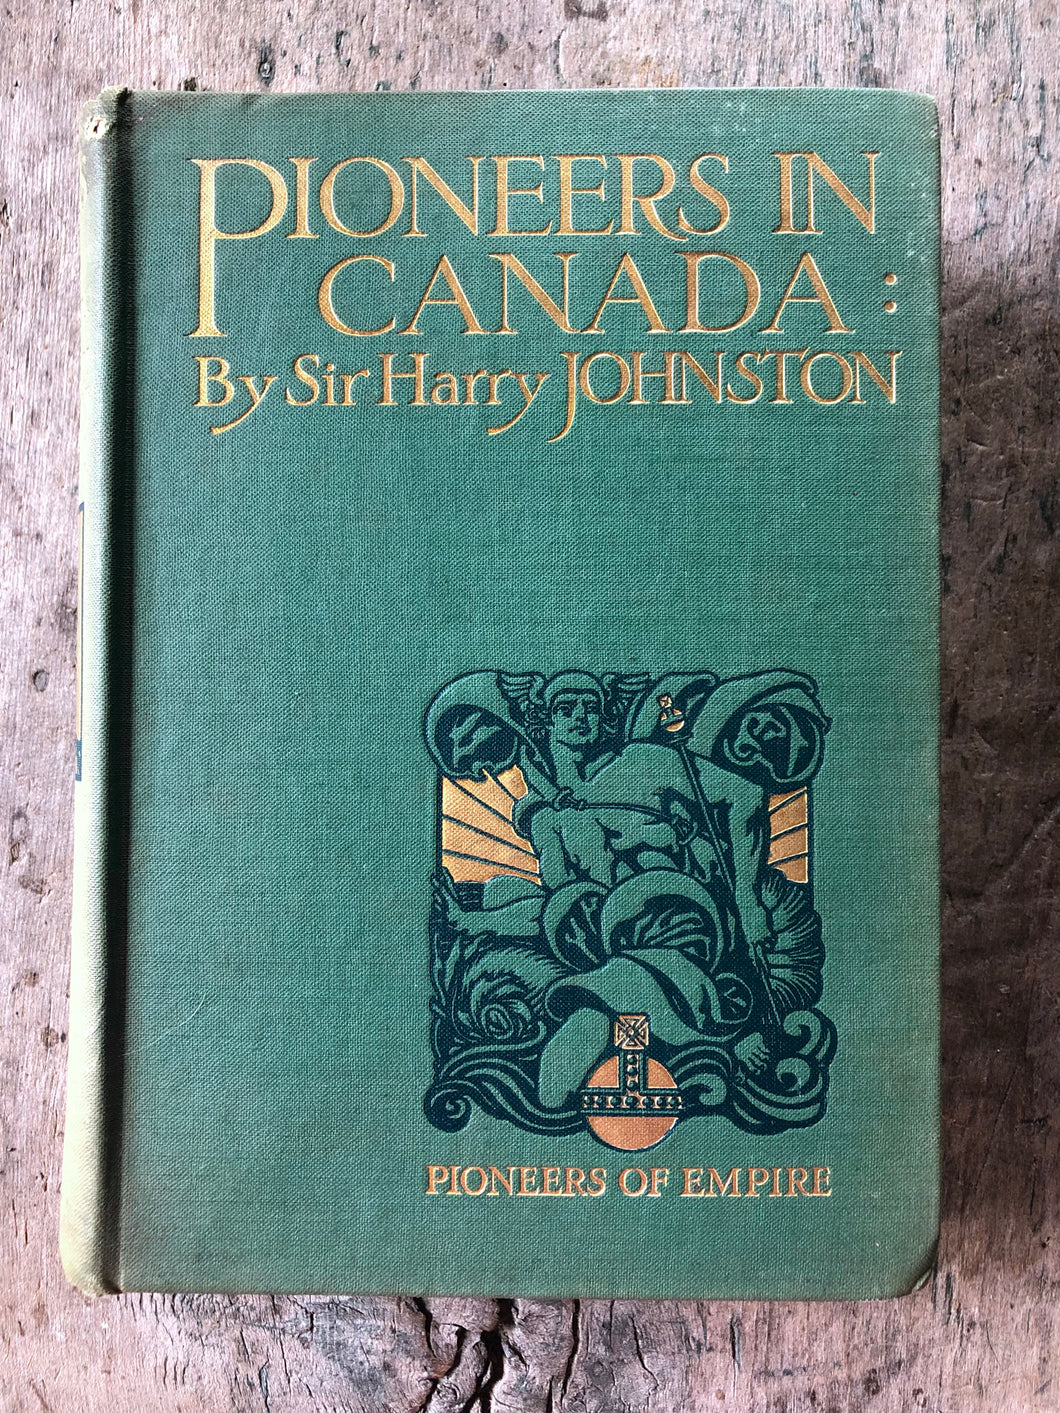 Pioneers in Canada by Sir Harry Johnston